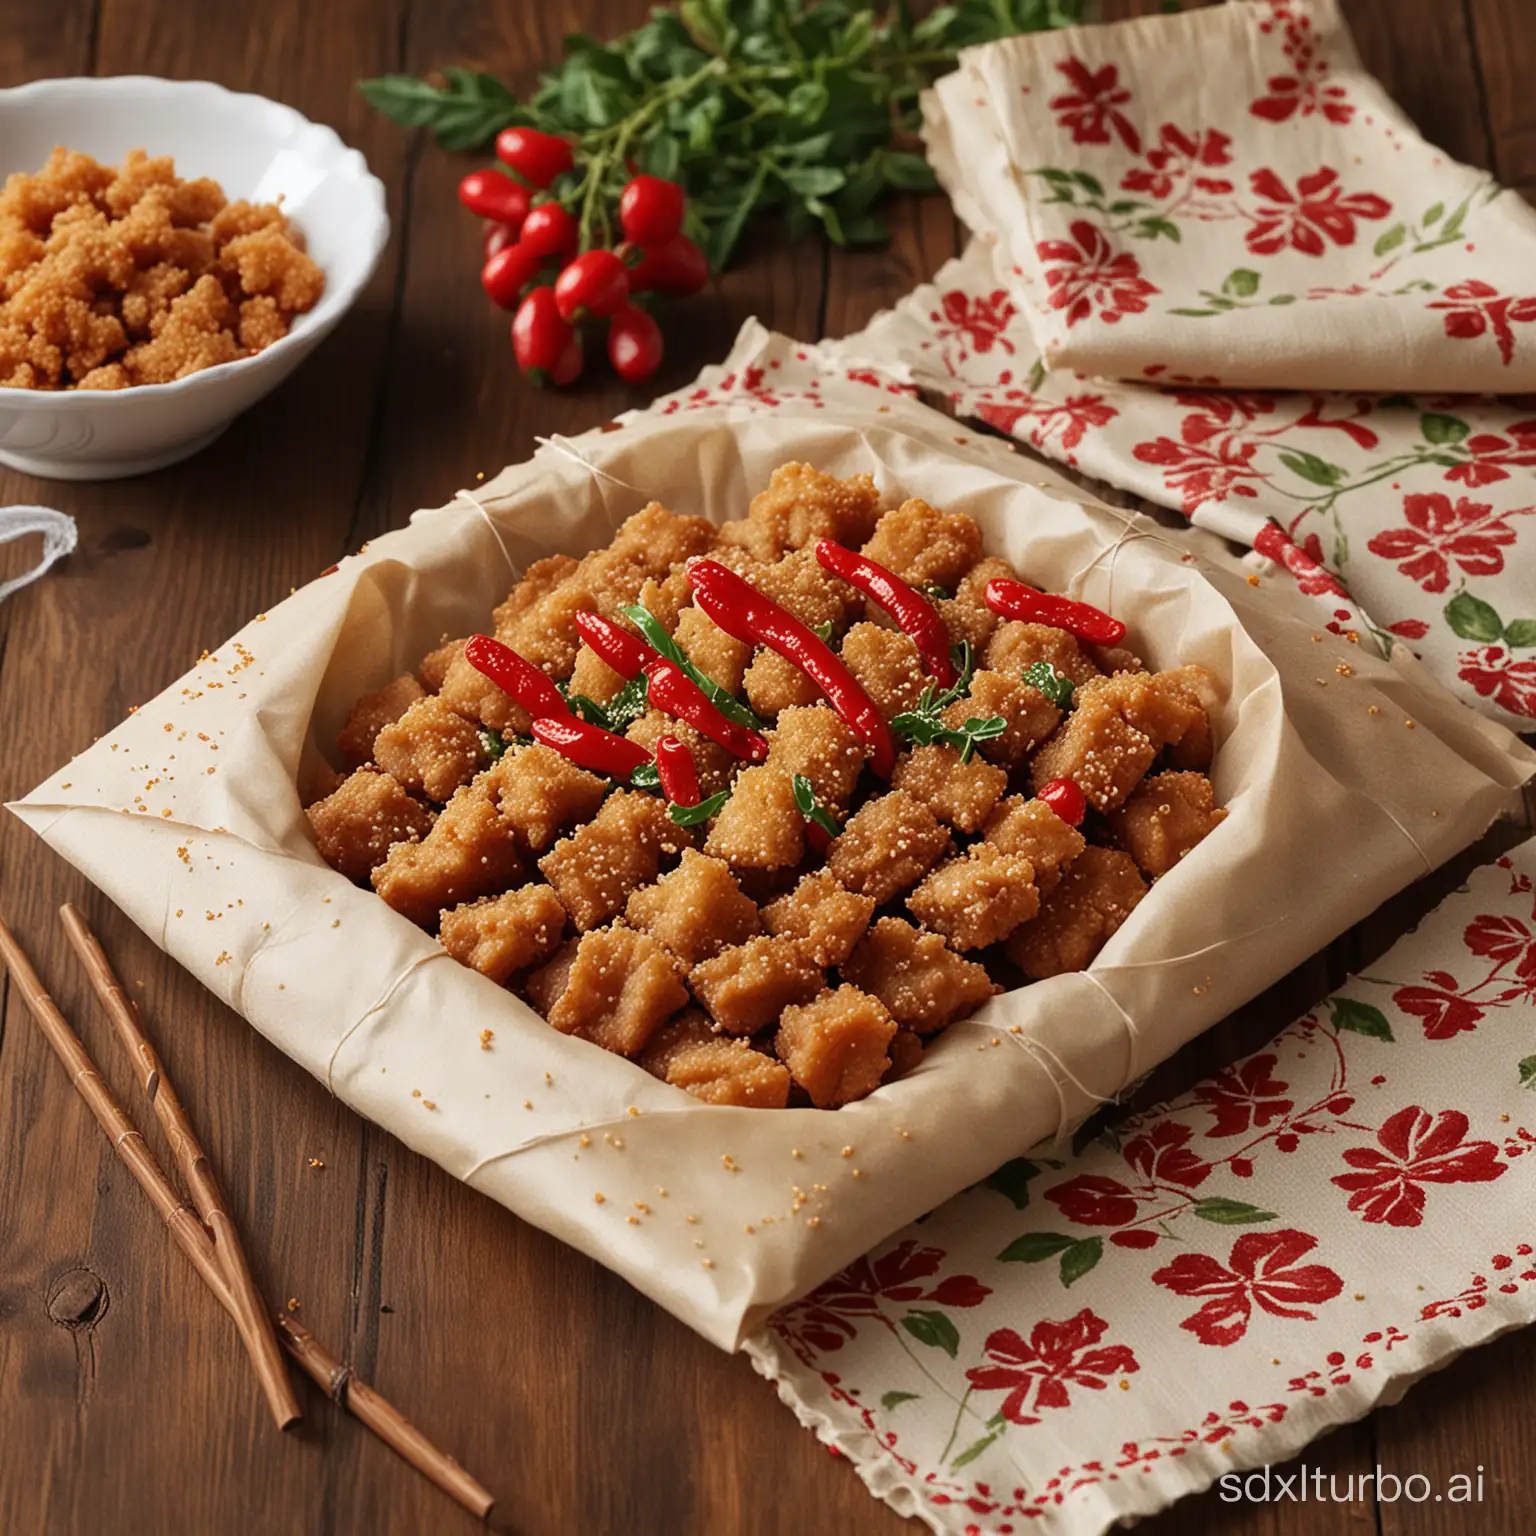 Delicious-Crispy-Fried-Meat-Exquisite-Dining-Table-Setting-with-Breadcrumbs-and-Spices